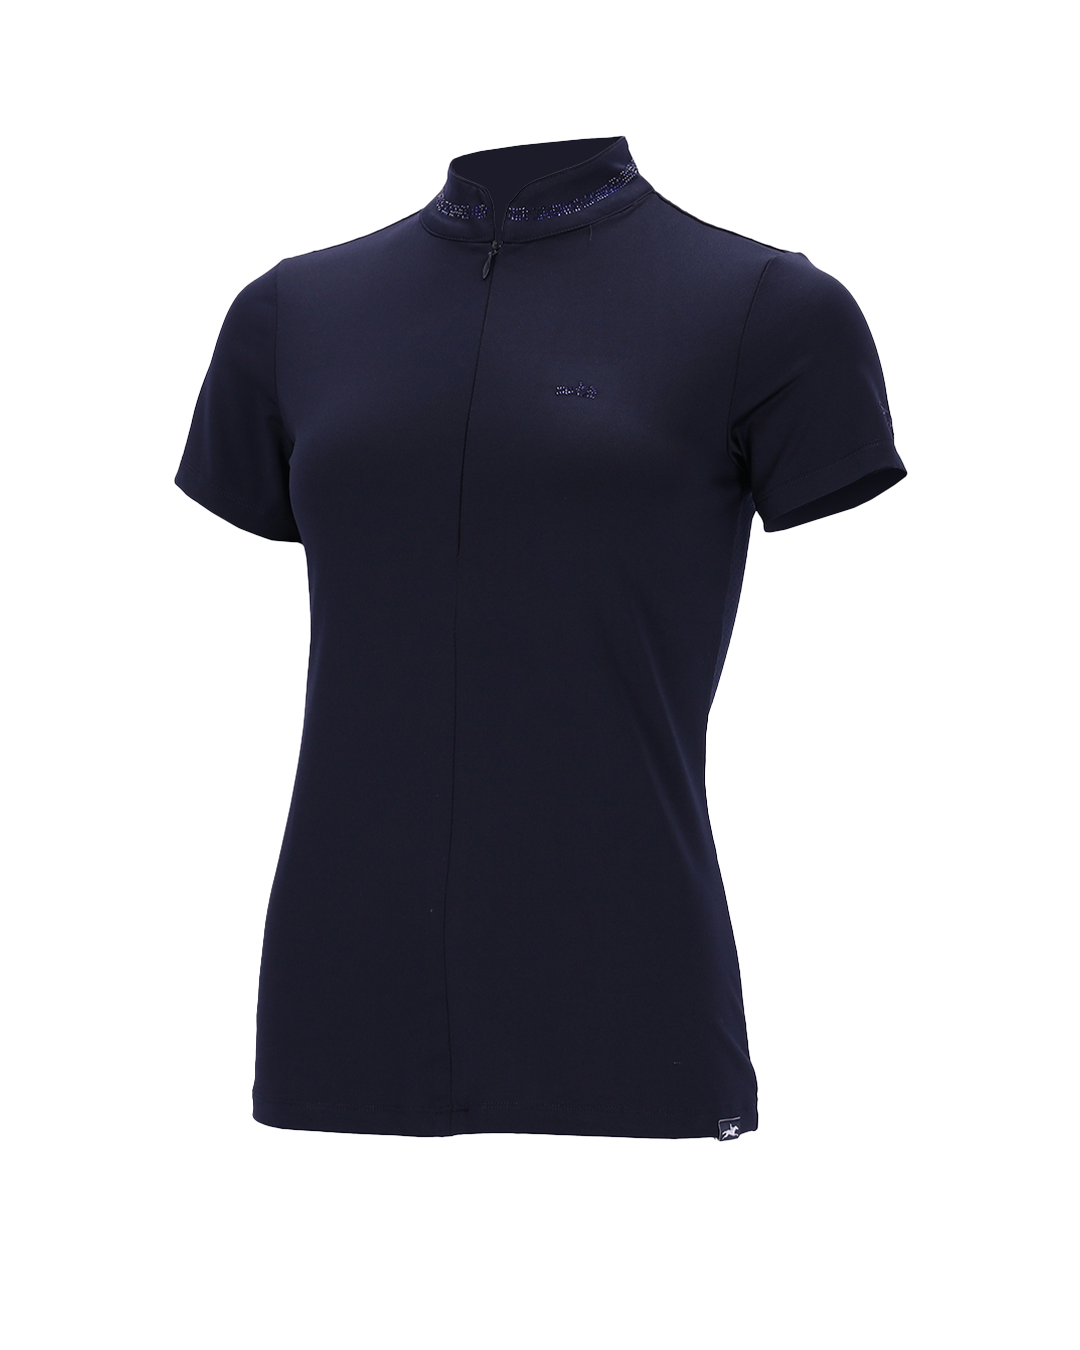 Schockemohle Summer Page Style Shirt Shirts & Tops Schockemohle - Equestrian Fashion Outfitters